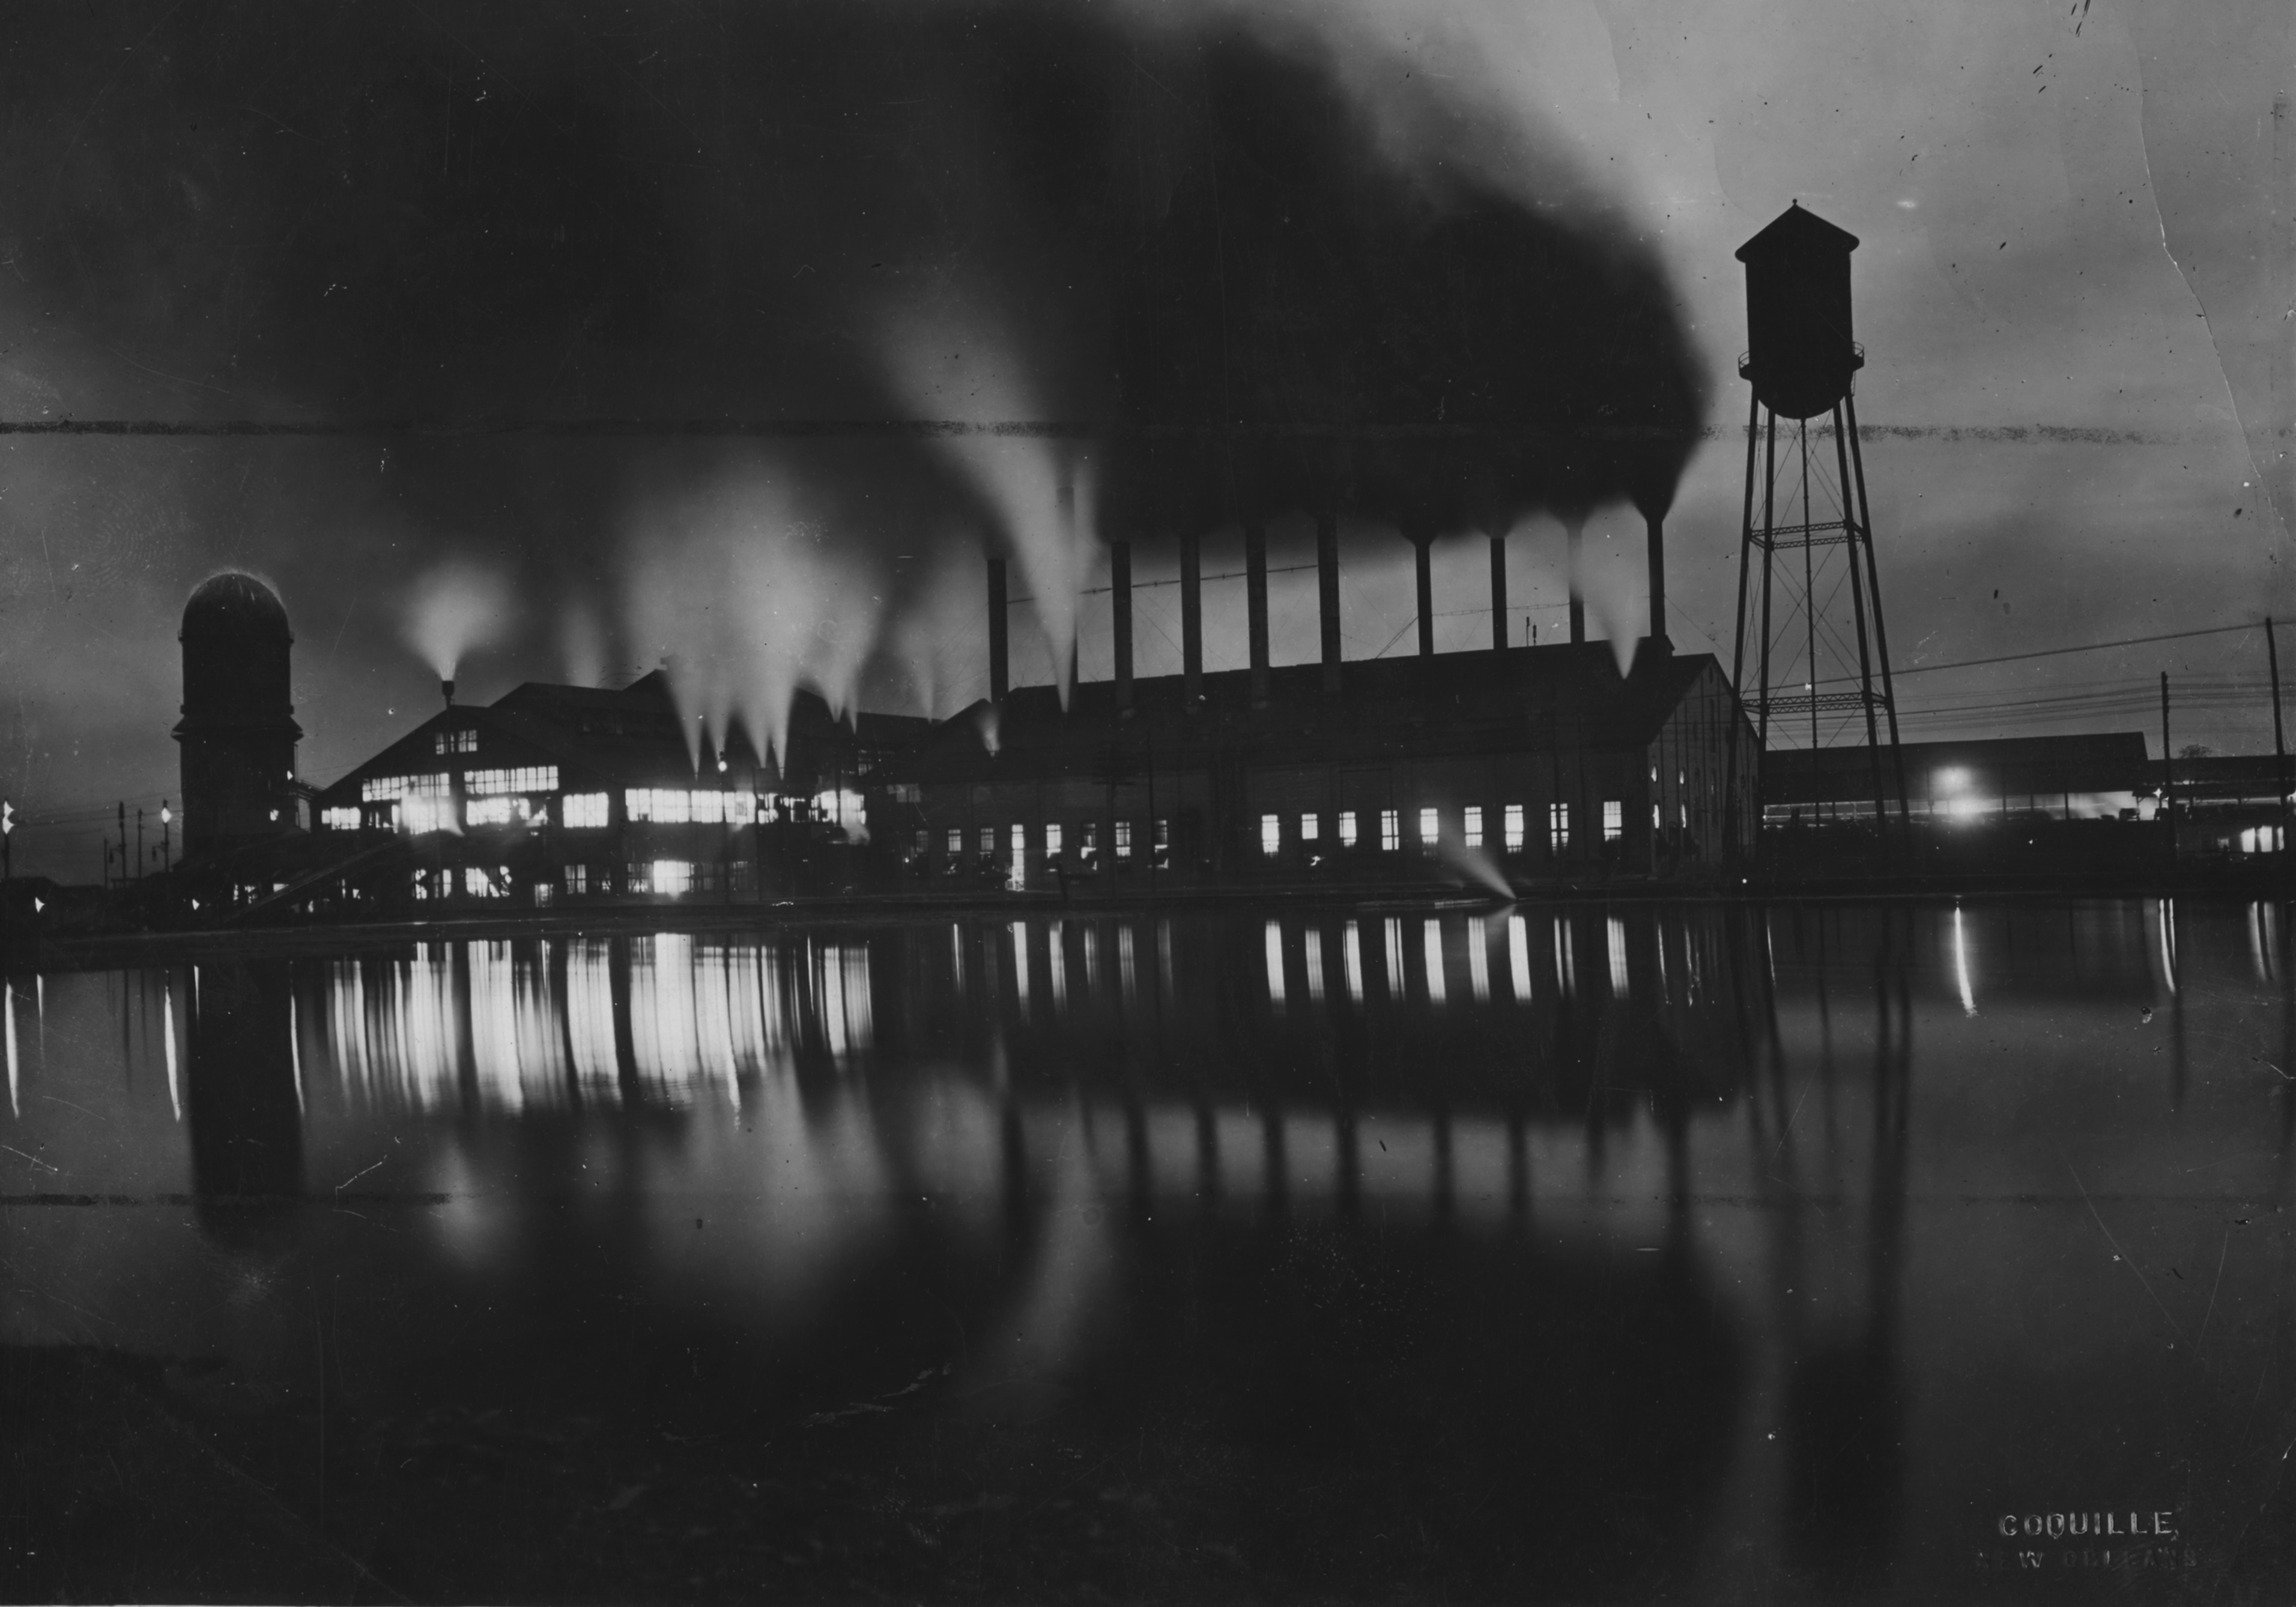 Dramatically lit black and white exterior image of a pine mill in operation at night.